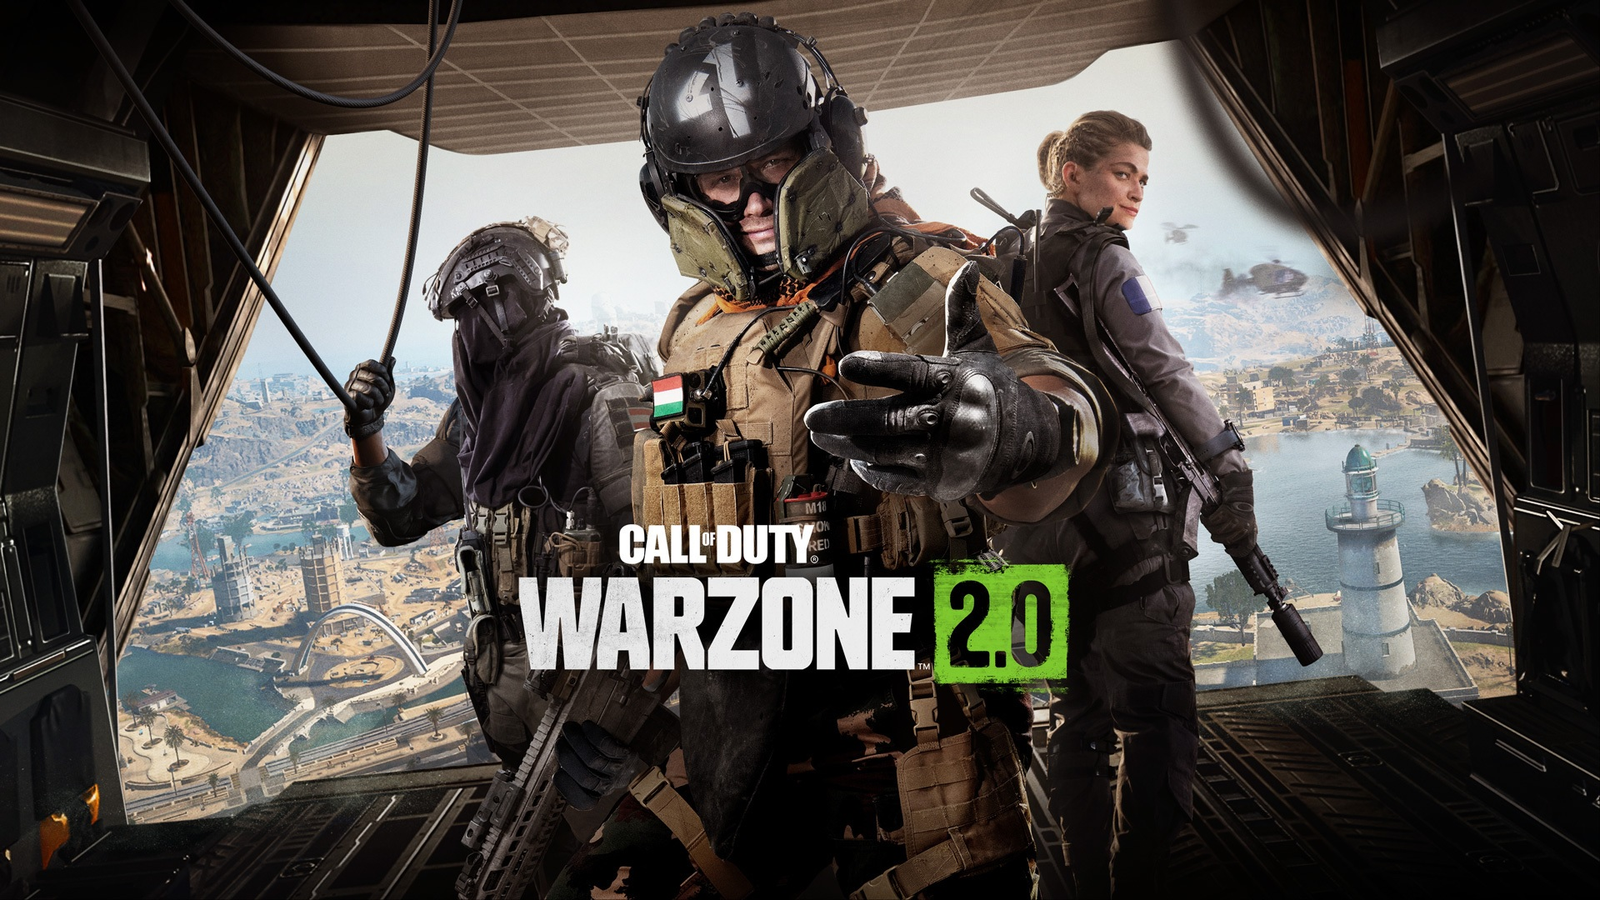 Call of Duty: Warzone Mobile announced ahead of COD Next